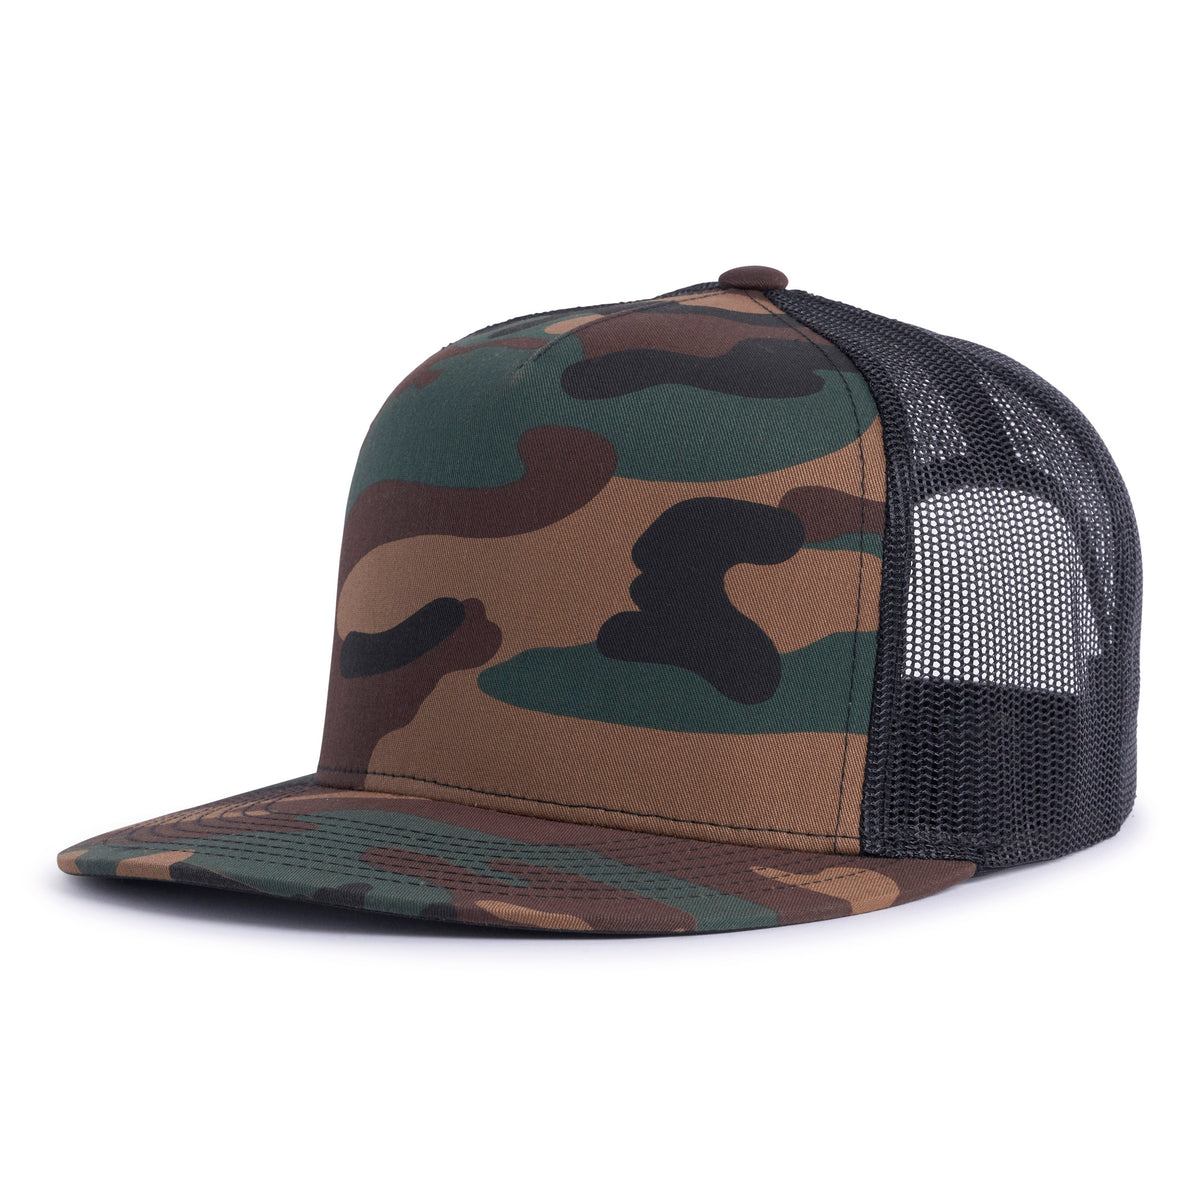 Classic brown and green camo trucker hat with a flat bill, 5-panels, structured high crown, black mesh back, and a snapback closure from Tailgate Hats.